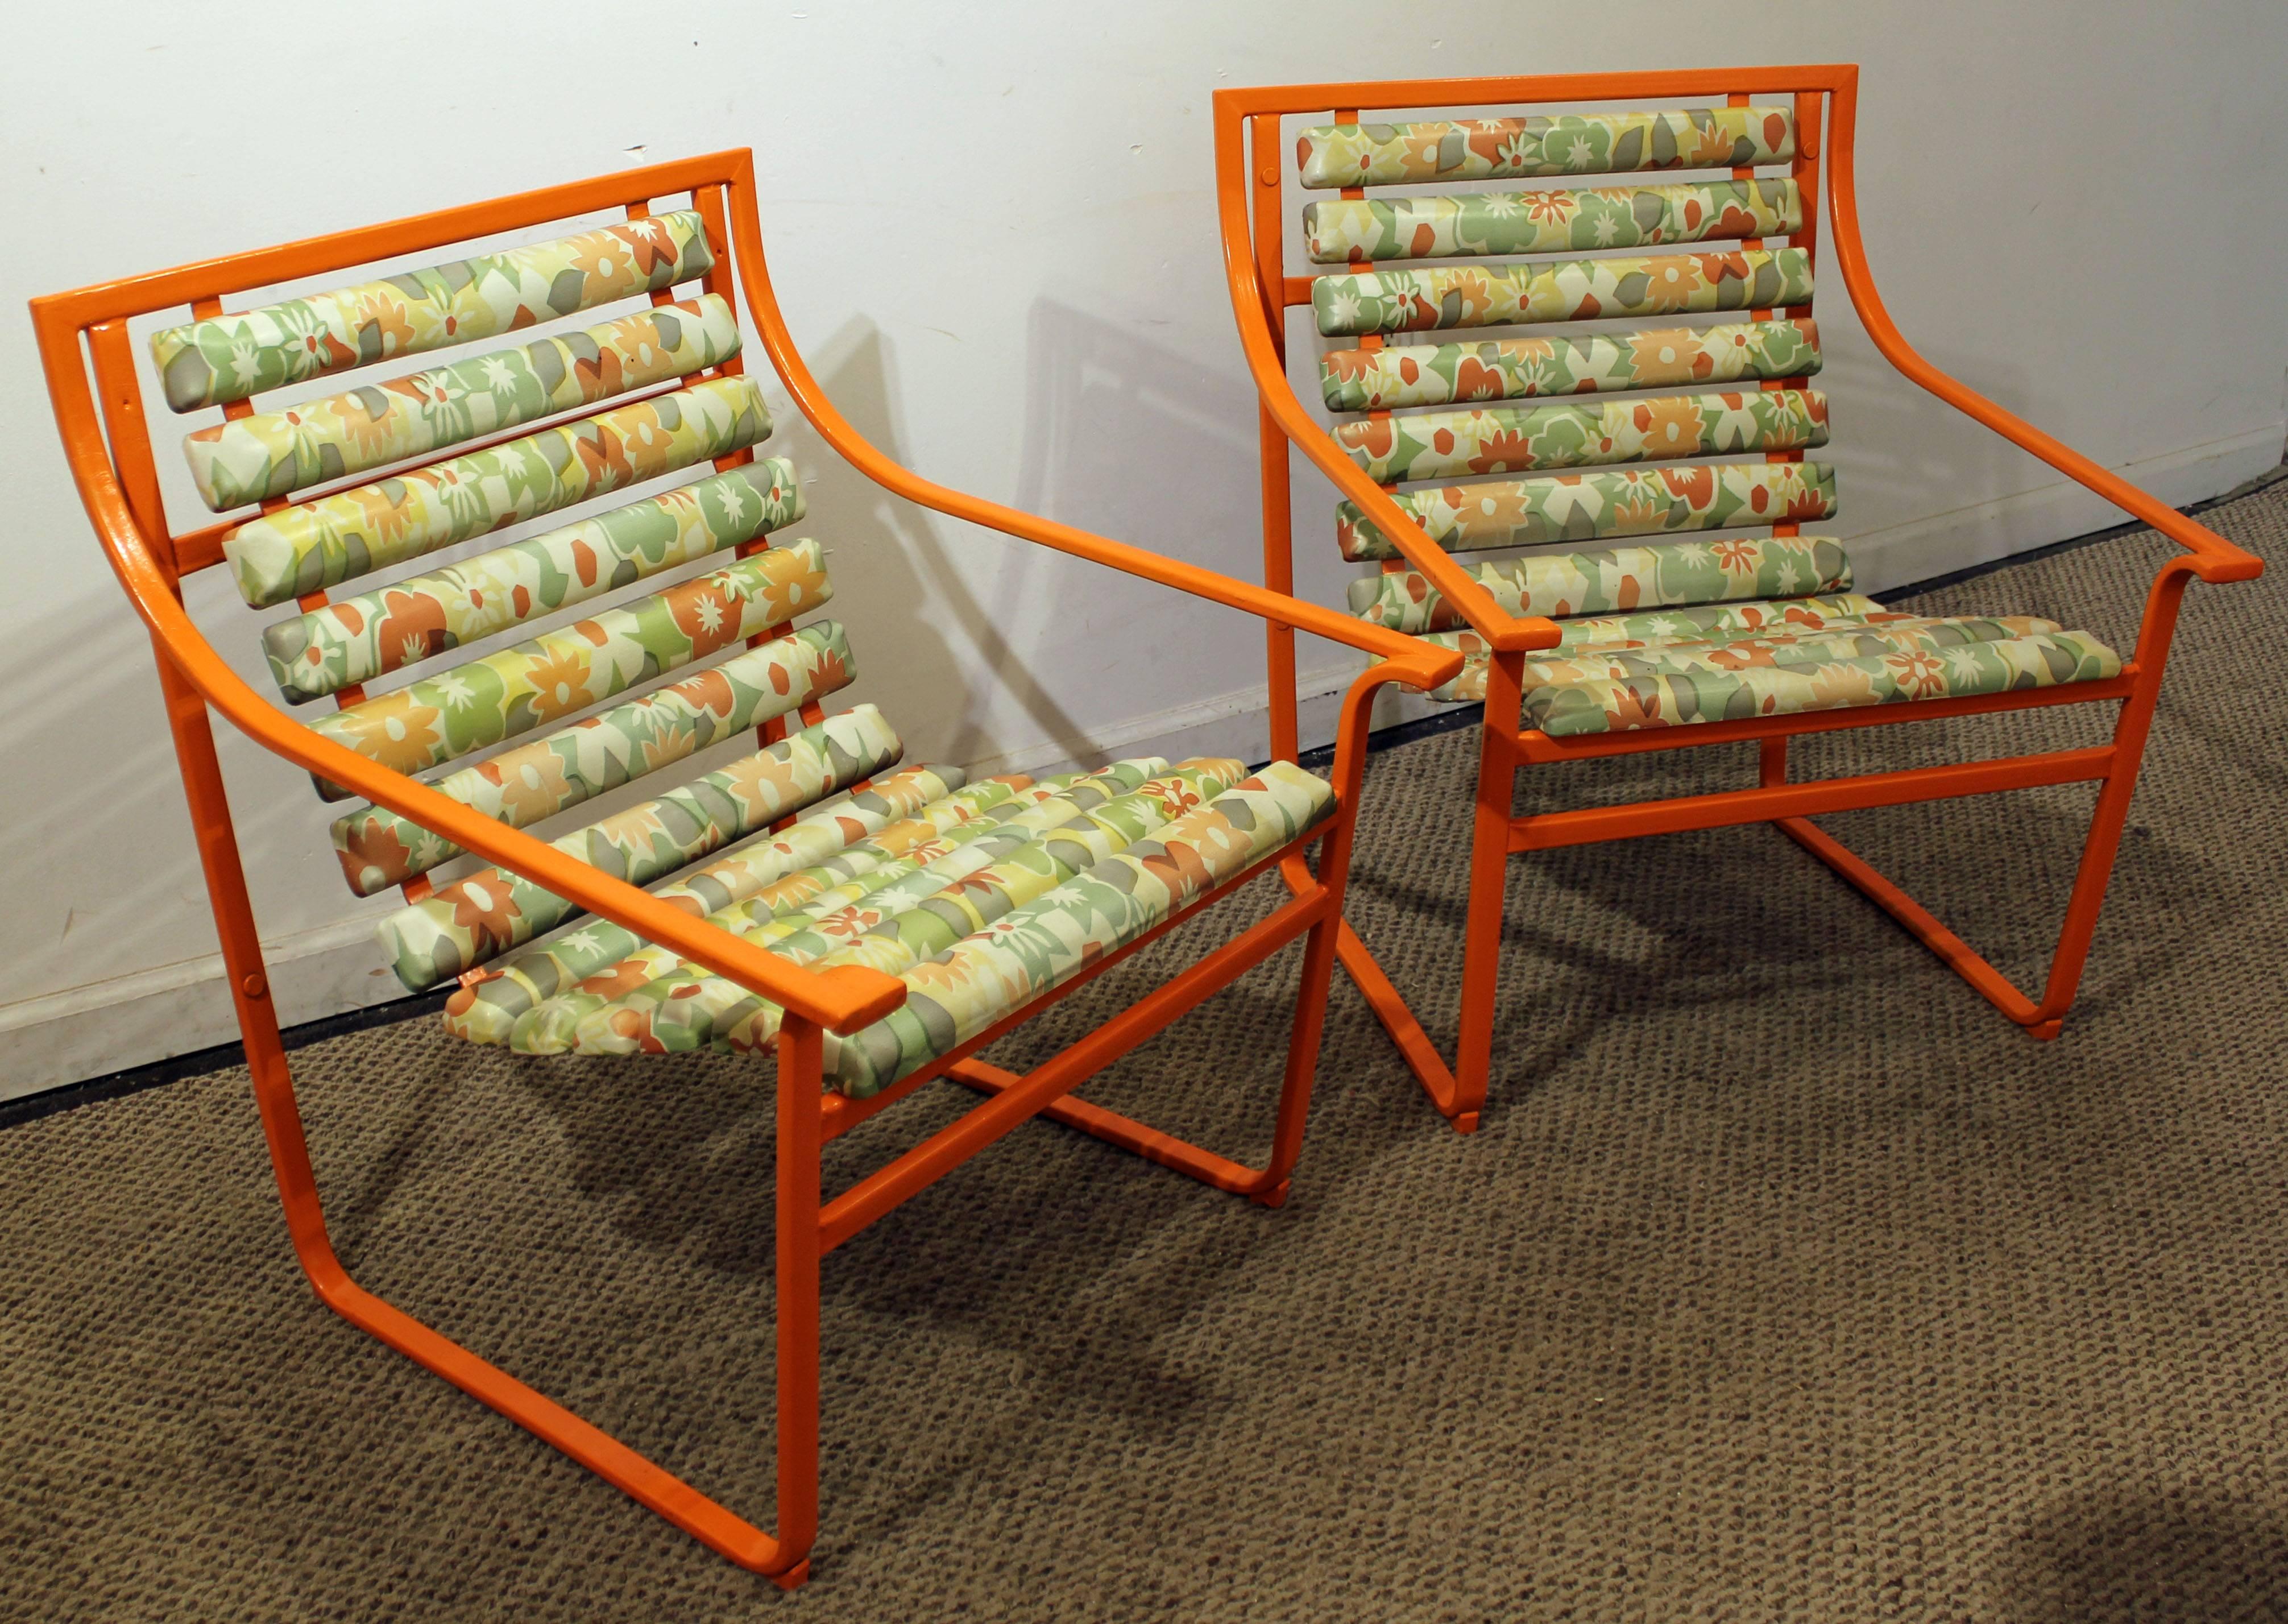 This set includes a pair of outdoor armchairs made by Samsonite. They have been repainted with an atomic orange color and include original upholstery.